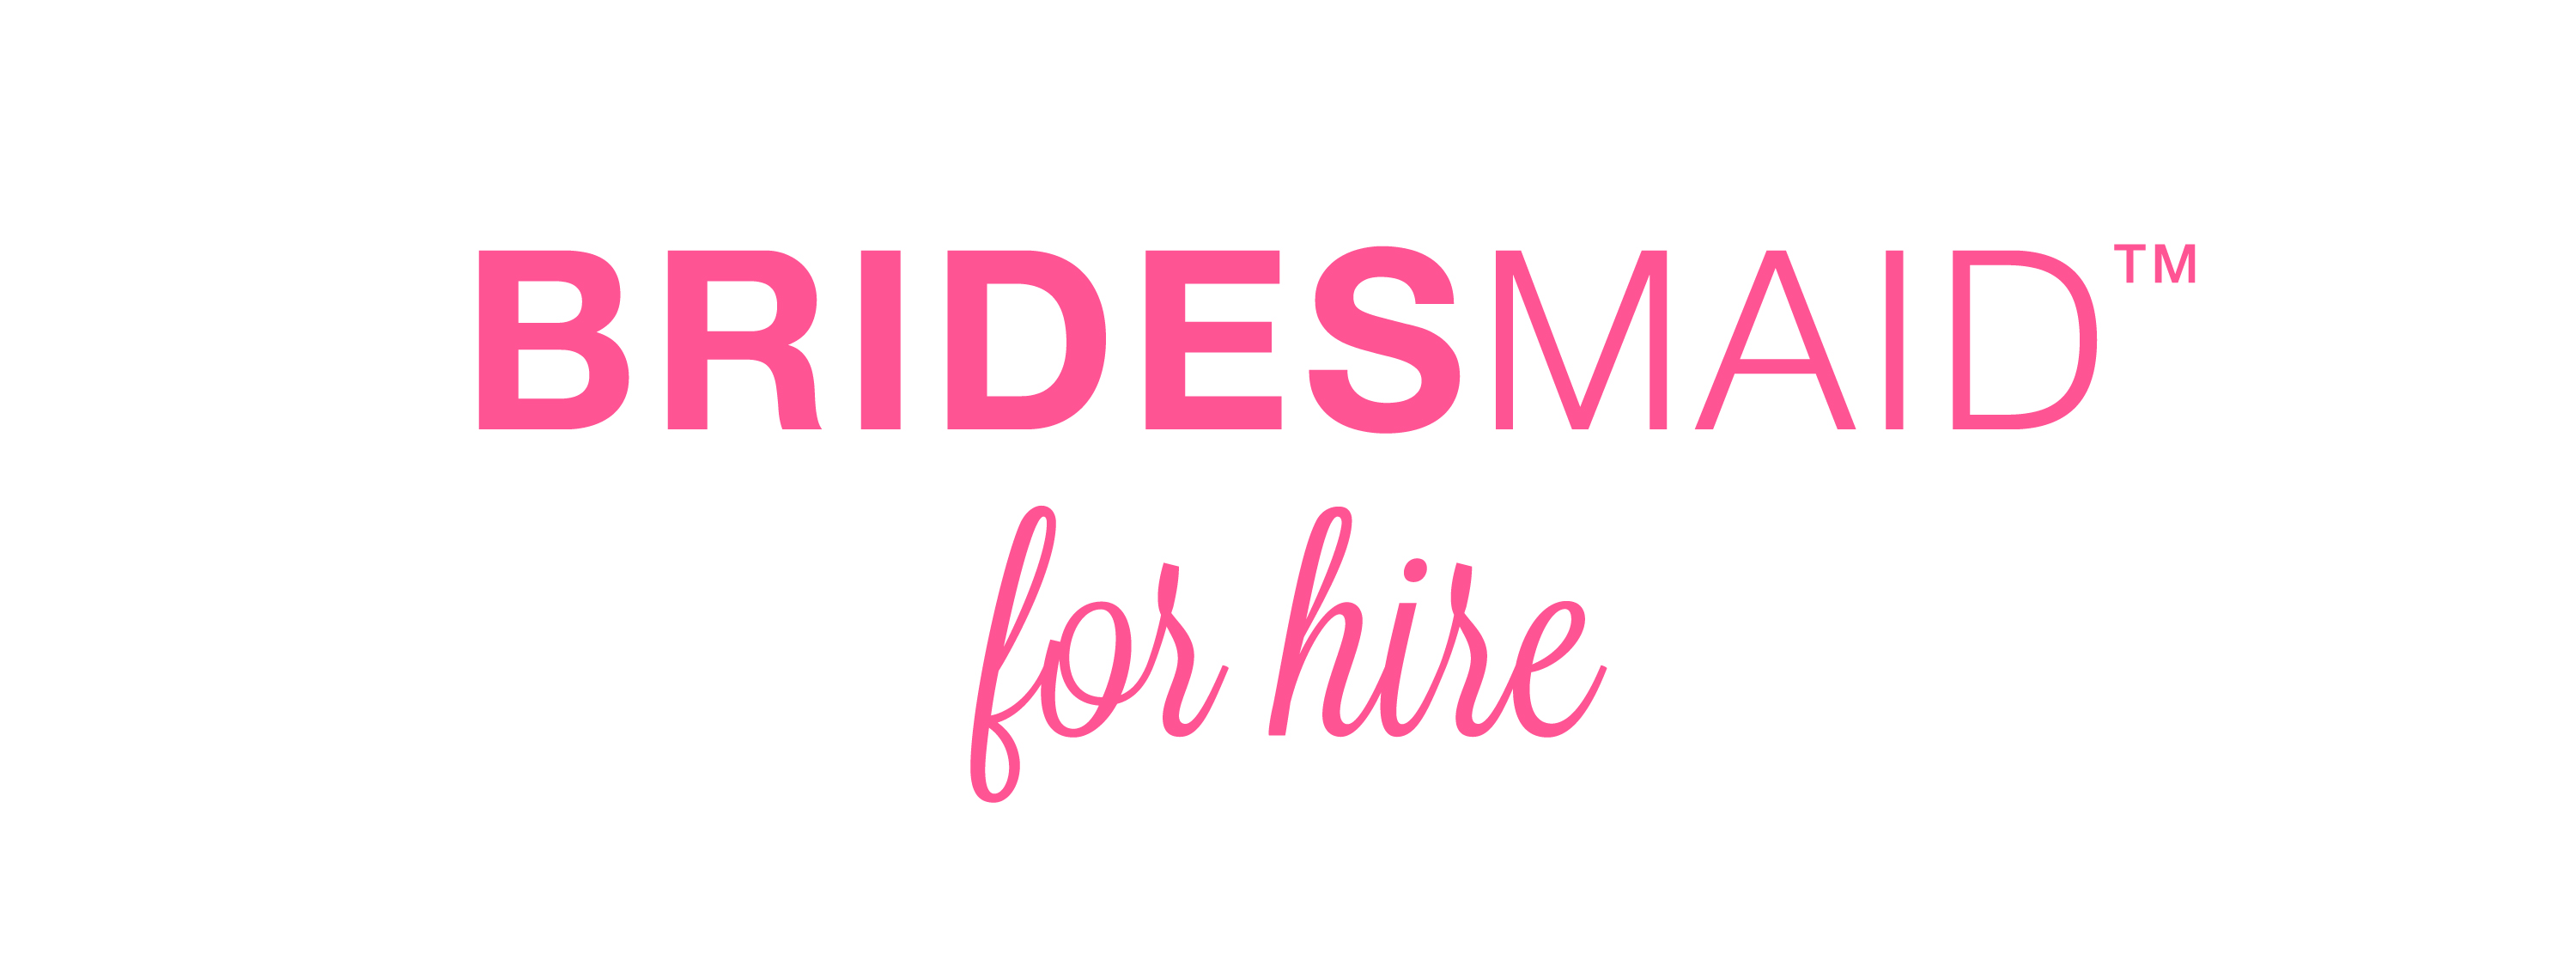 Image result for bridesmaid for hire logo